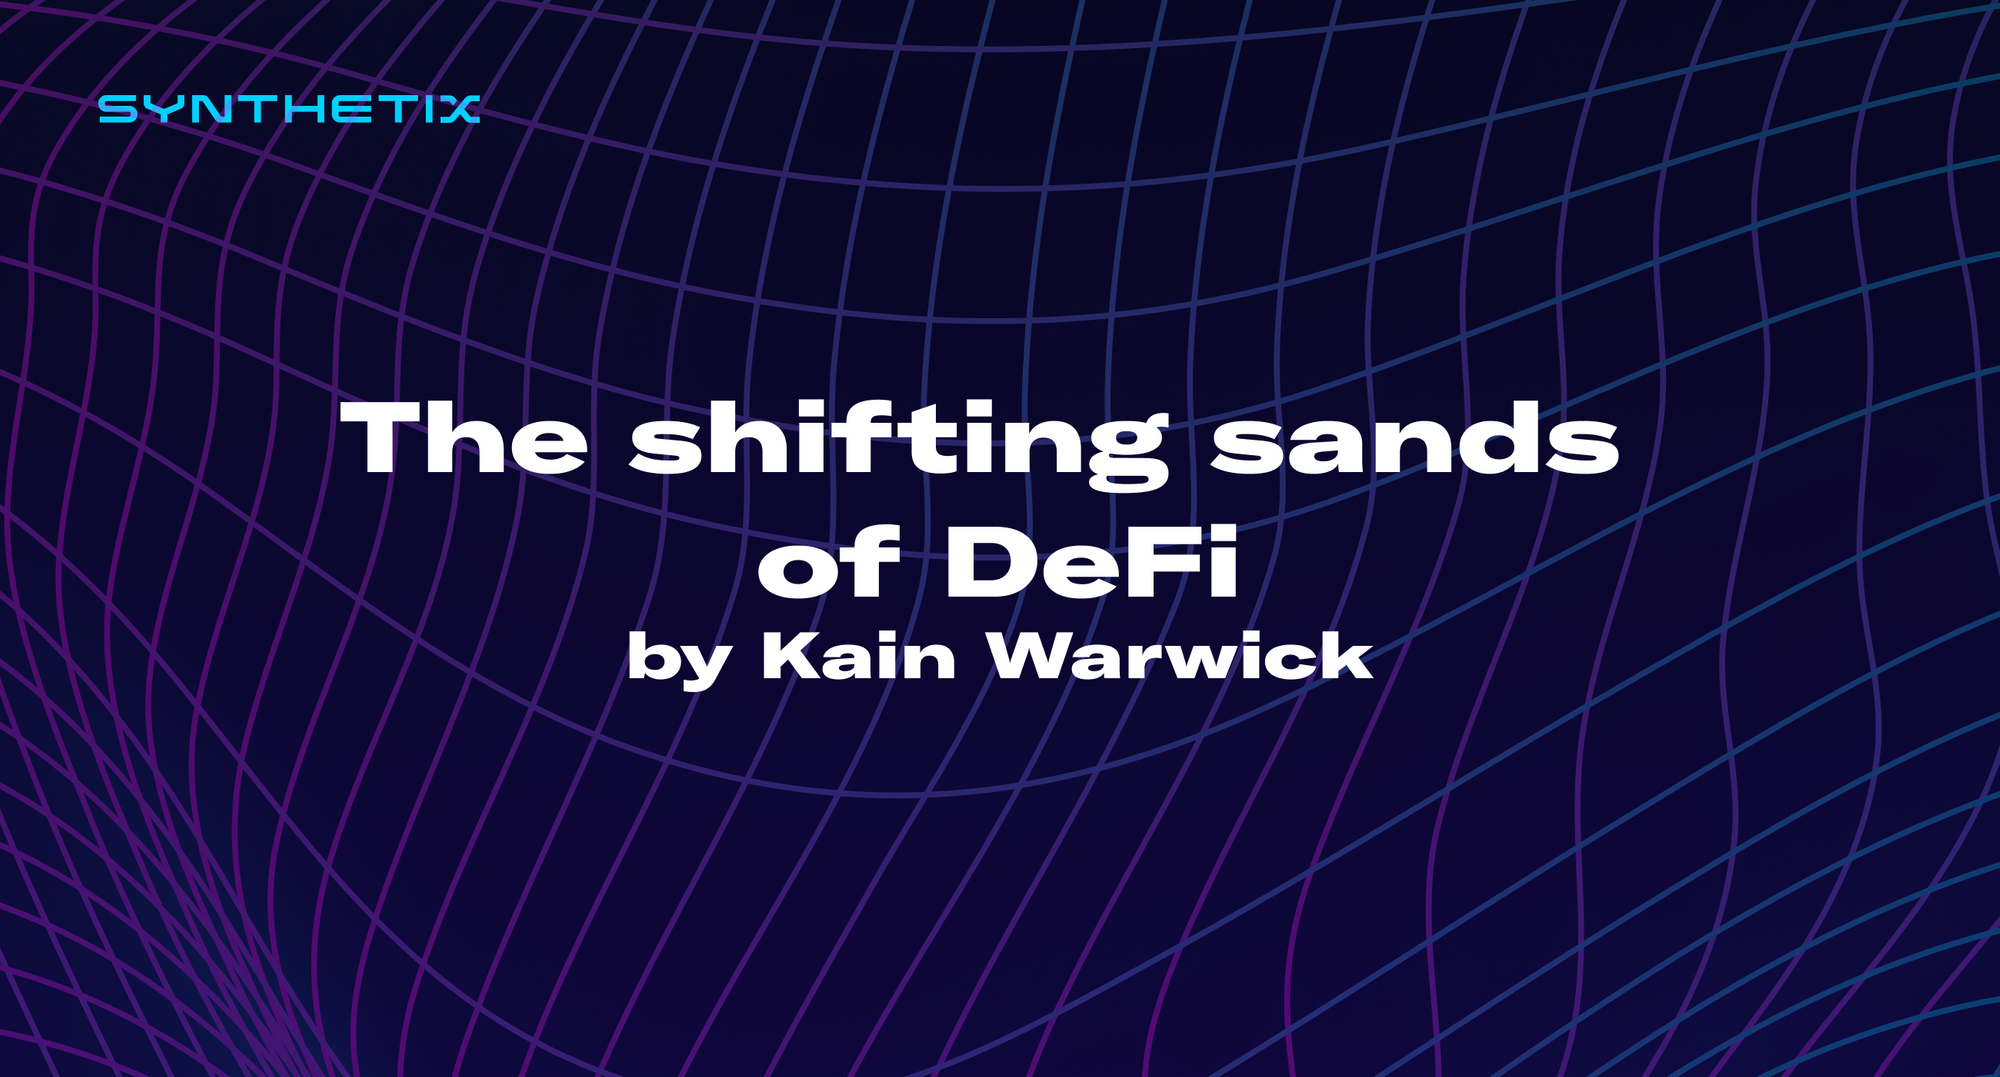 The shifting sands of DeFi